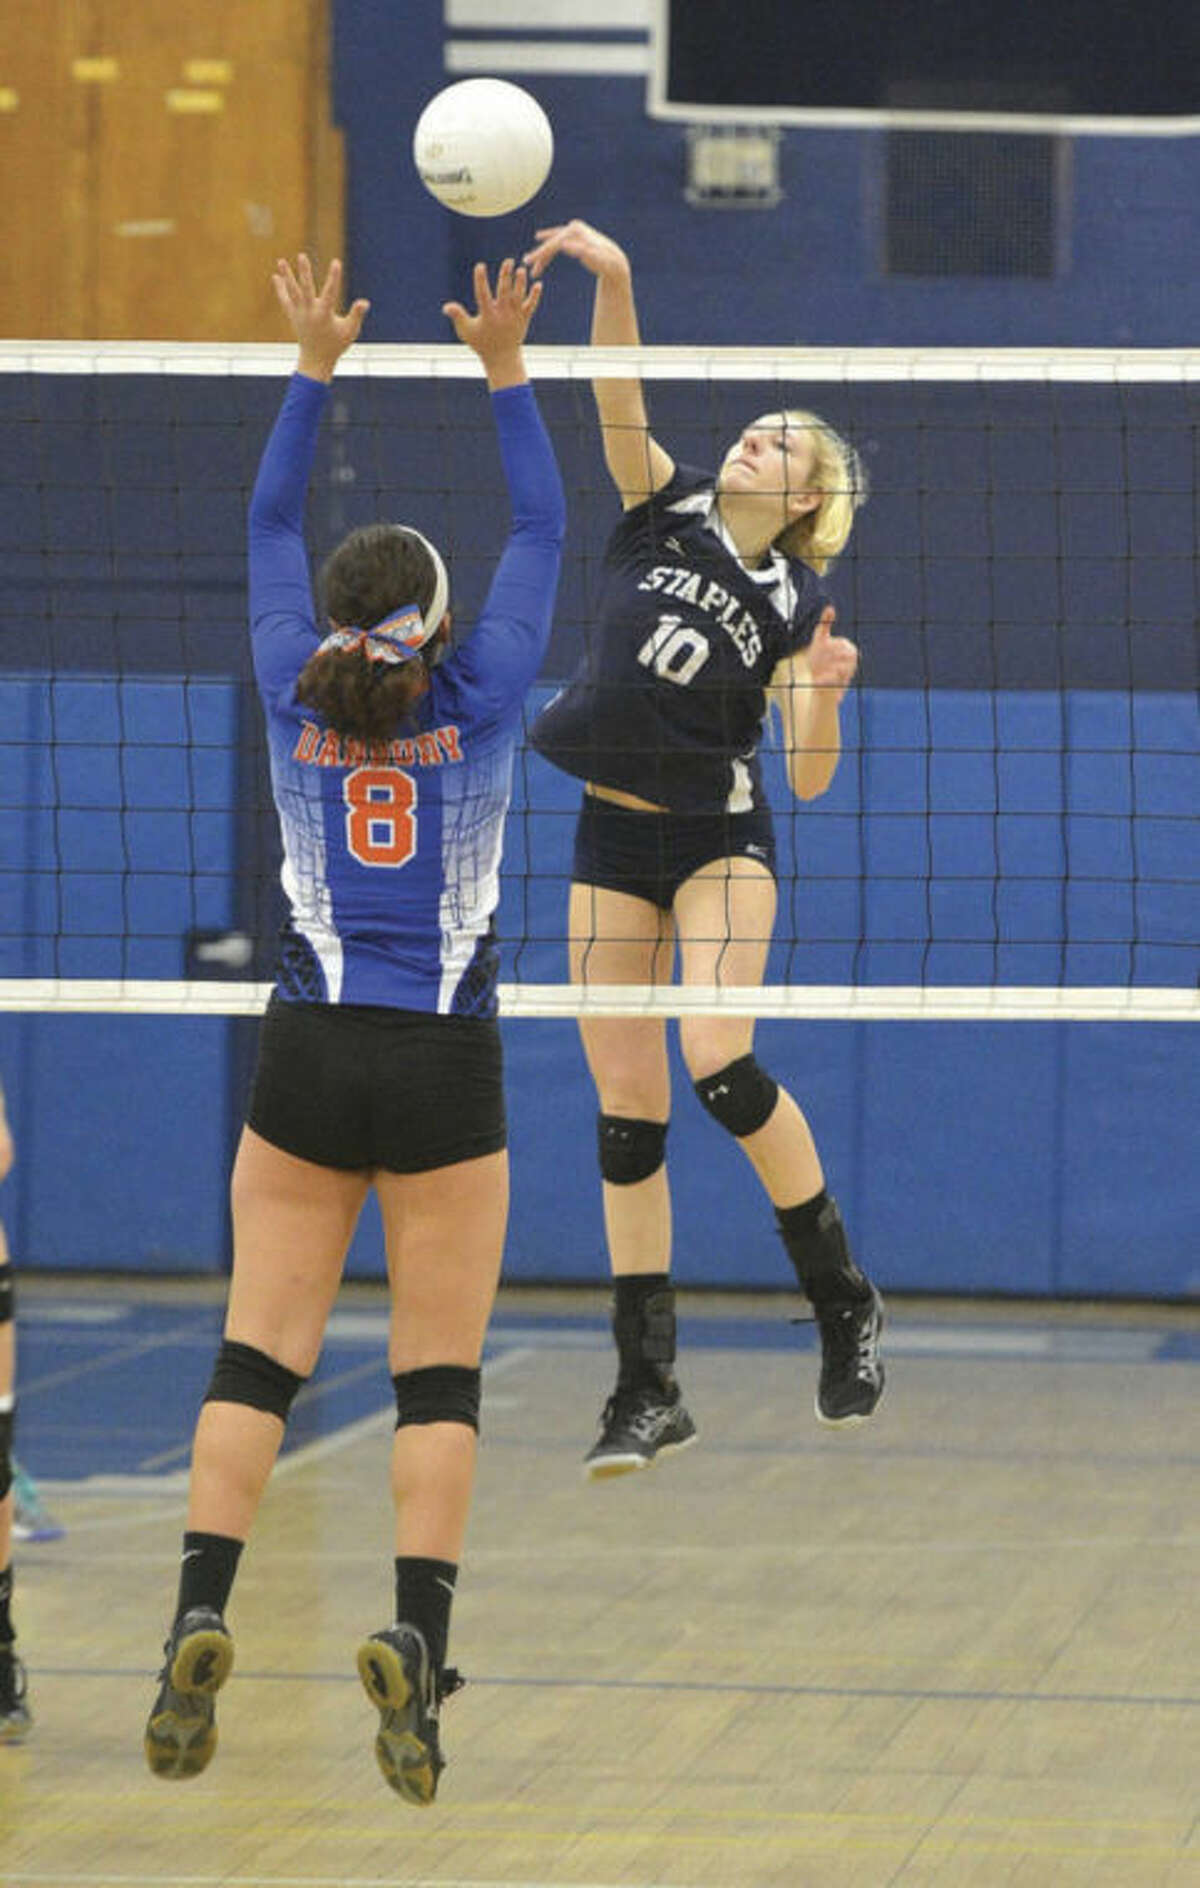 Amelia Brackett of Staples, right, goes up for a kill during Thursday's girls volleyball state tournament match against Danbury. Brackett had 22 kills in the second-seeded Wreckers' 3-1 win. Hour Photo/ Alex von Kleydorff